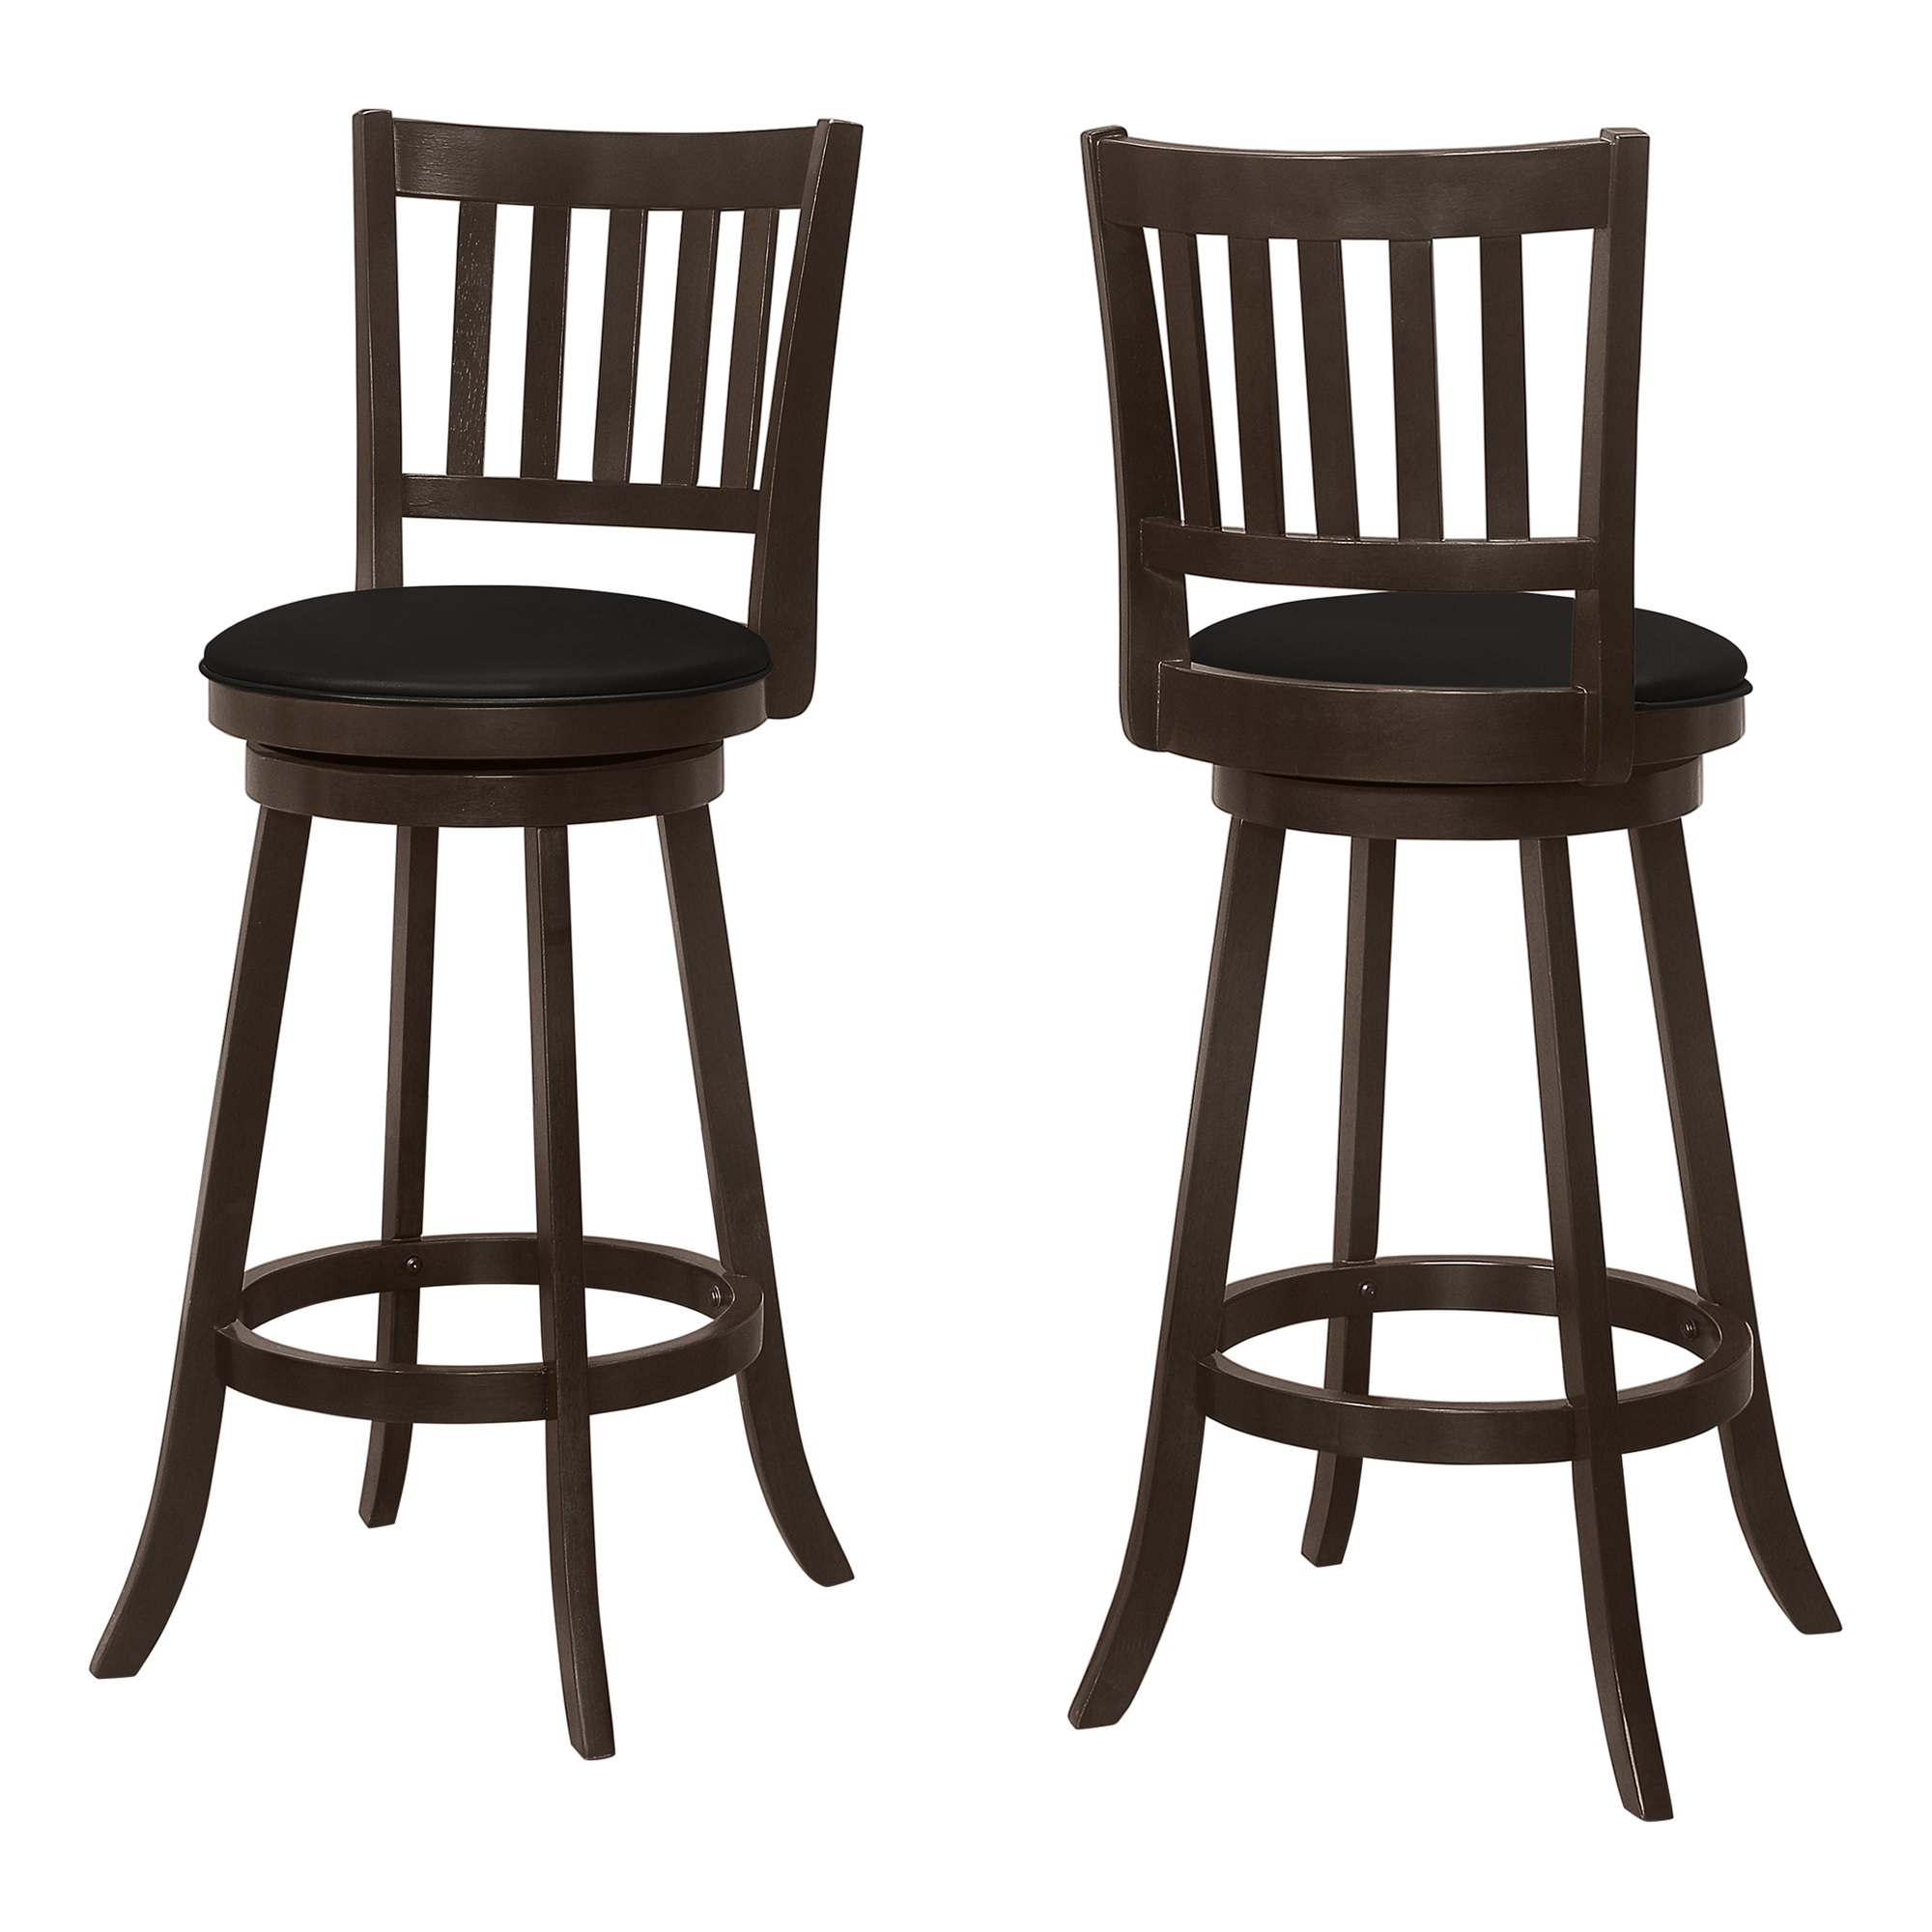 MONARCH SPECIALTIES INC Contemporary 44"H Upholstered Espresso Swivel Bar Height BarStool - 2Pcs